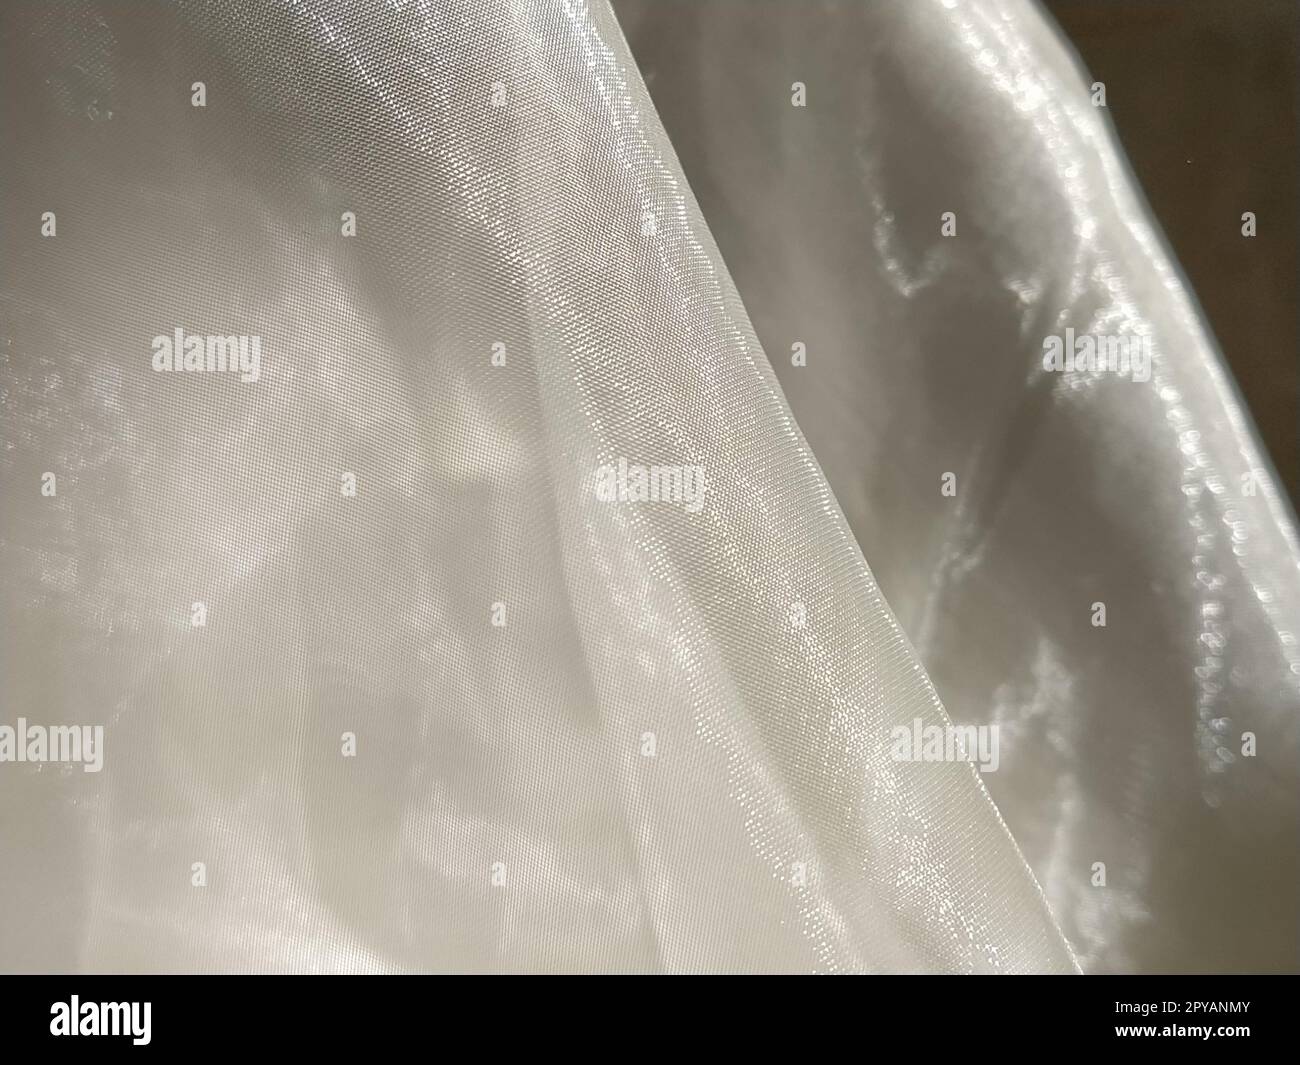 Organza in white and beige or champagne color close-up. Lightweight sheer tulle curtains under side lighting Stock Photo